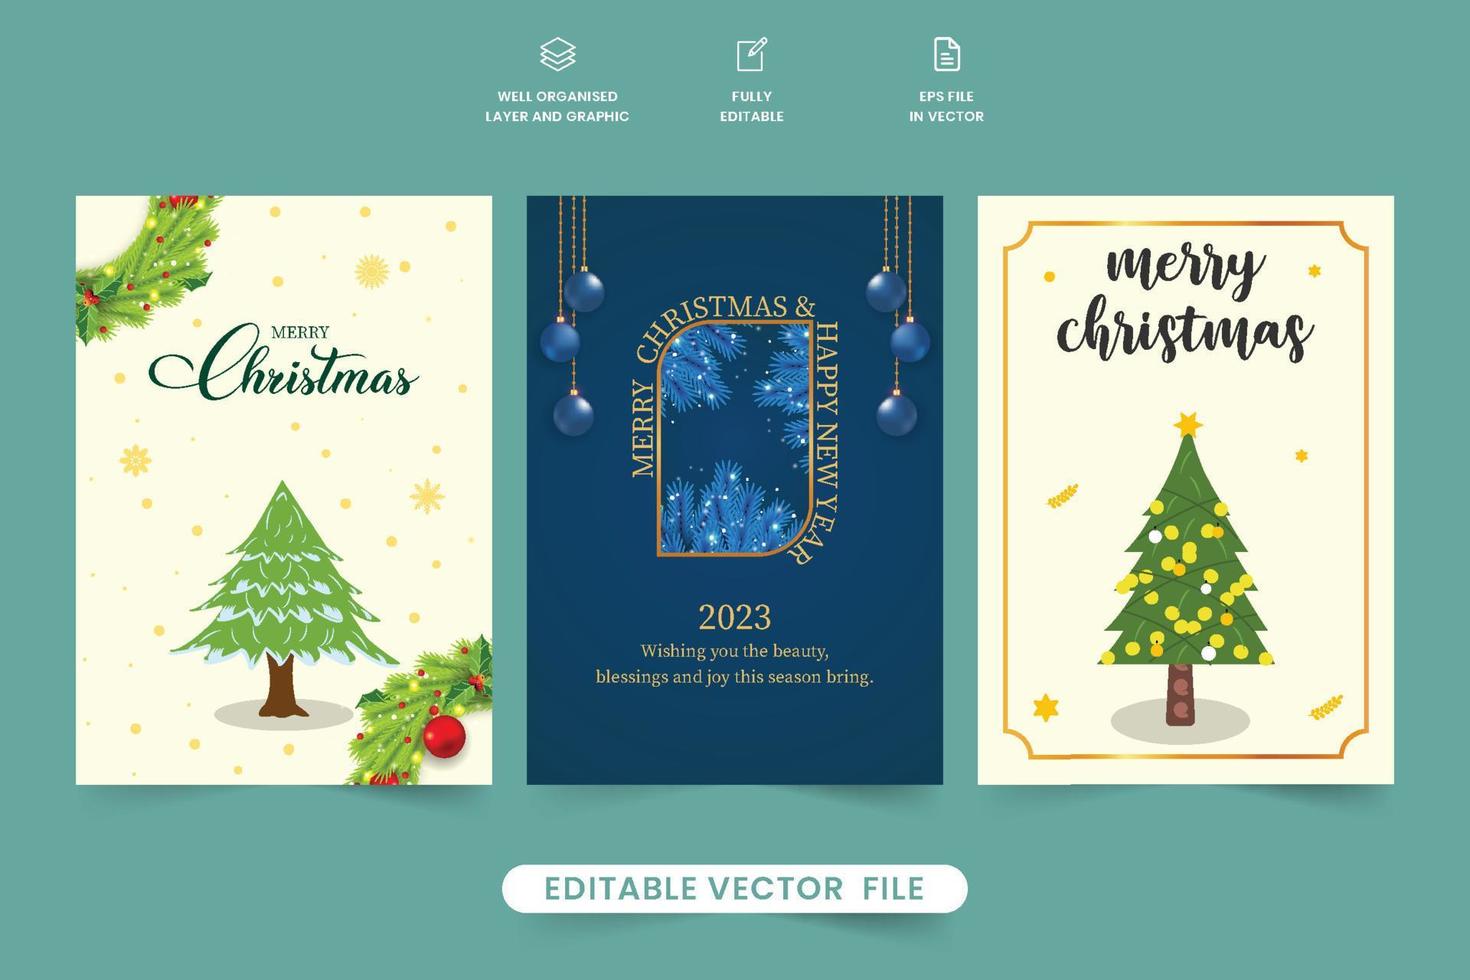 Creative Christmas gift card design with realistic wreath and wish calligraphy. Luxurious invitation card set vector with blue and off-white backgrounds. Modern greeting card design with calligraphy.